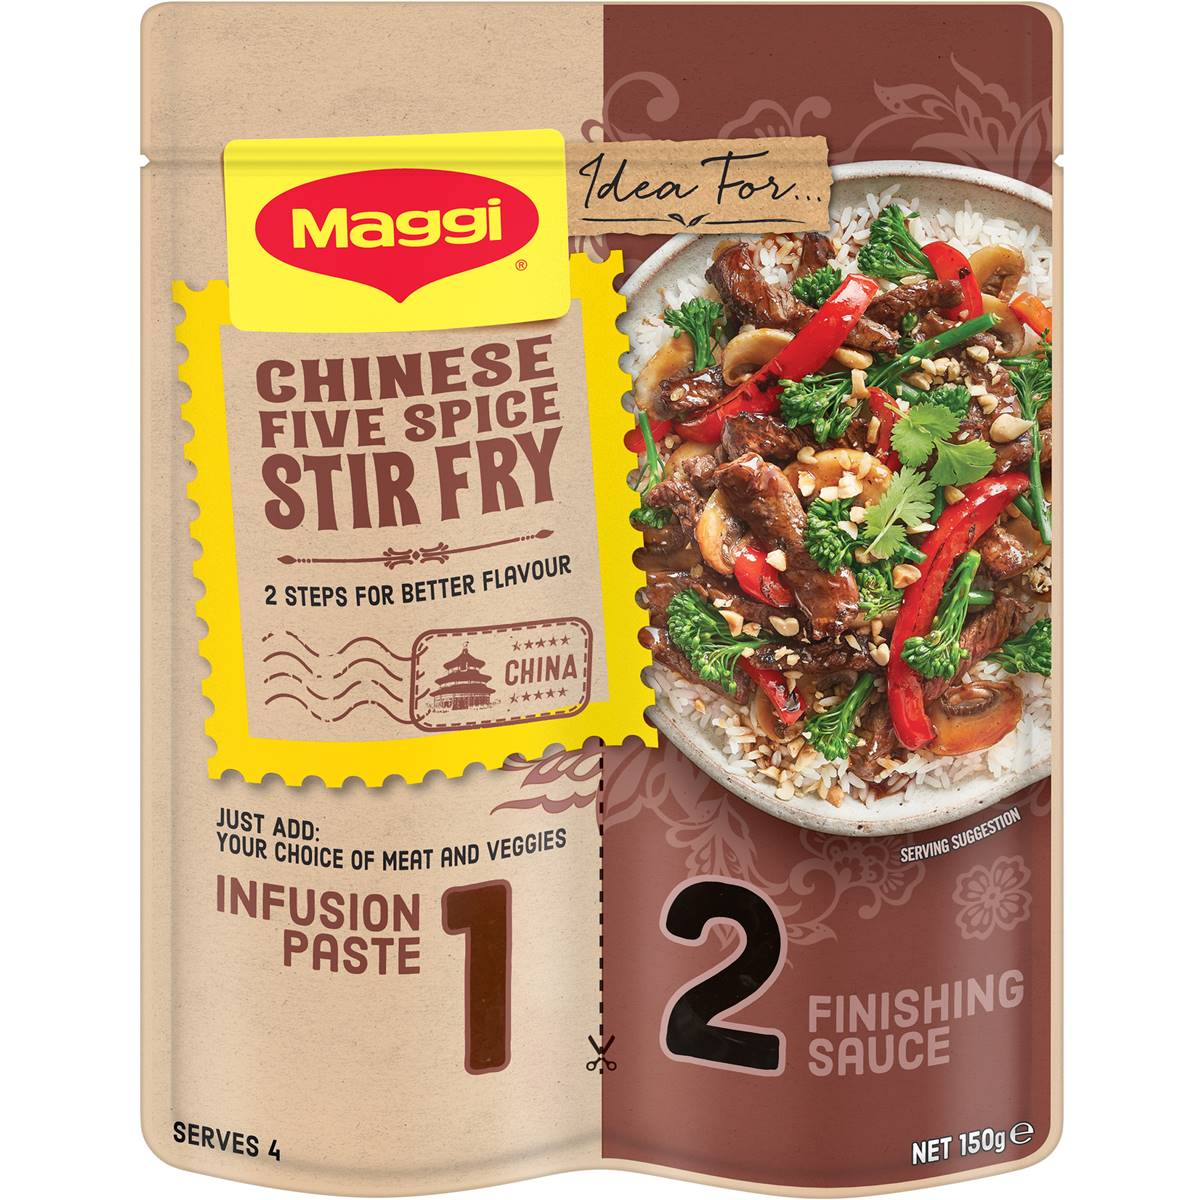 Maggi 2-step Stir Fry Creations Chinese Five Spice & Soy Beef